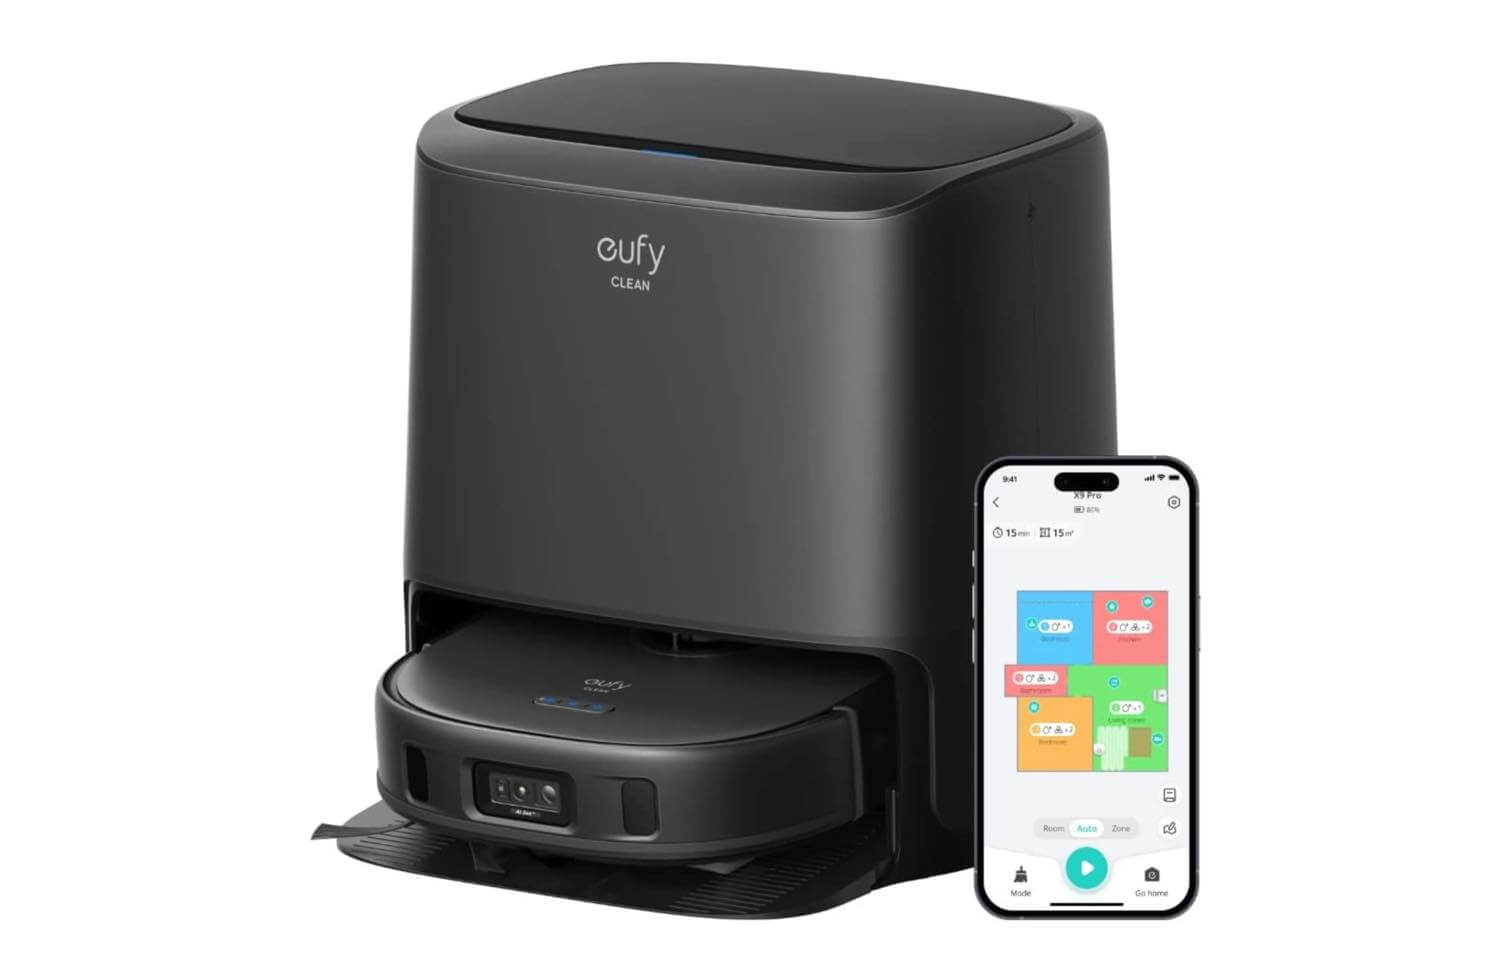 Anker、加圧式デュアル回転モップを搭載したロボット掃除機｢Eufy Clean X9 Pro with Auto-Clean Station｣を発売